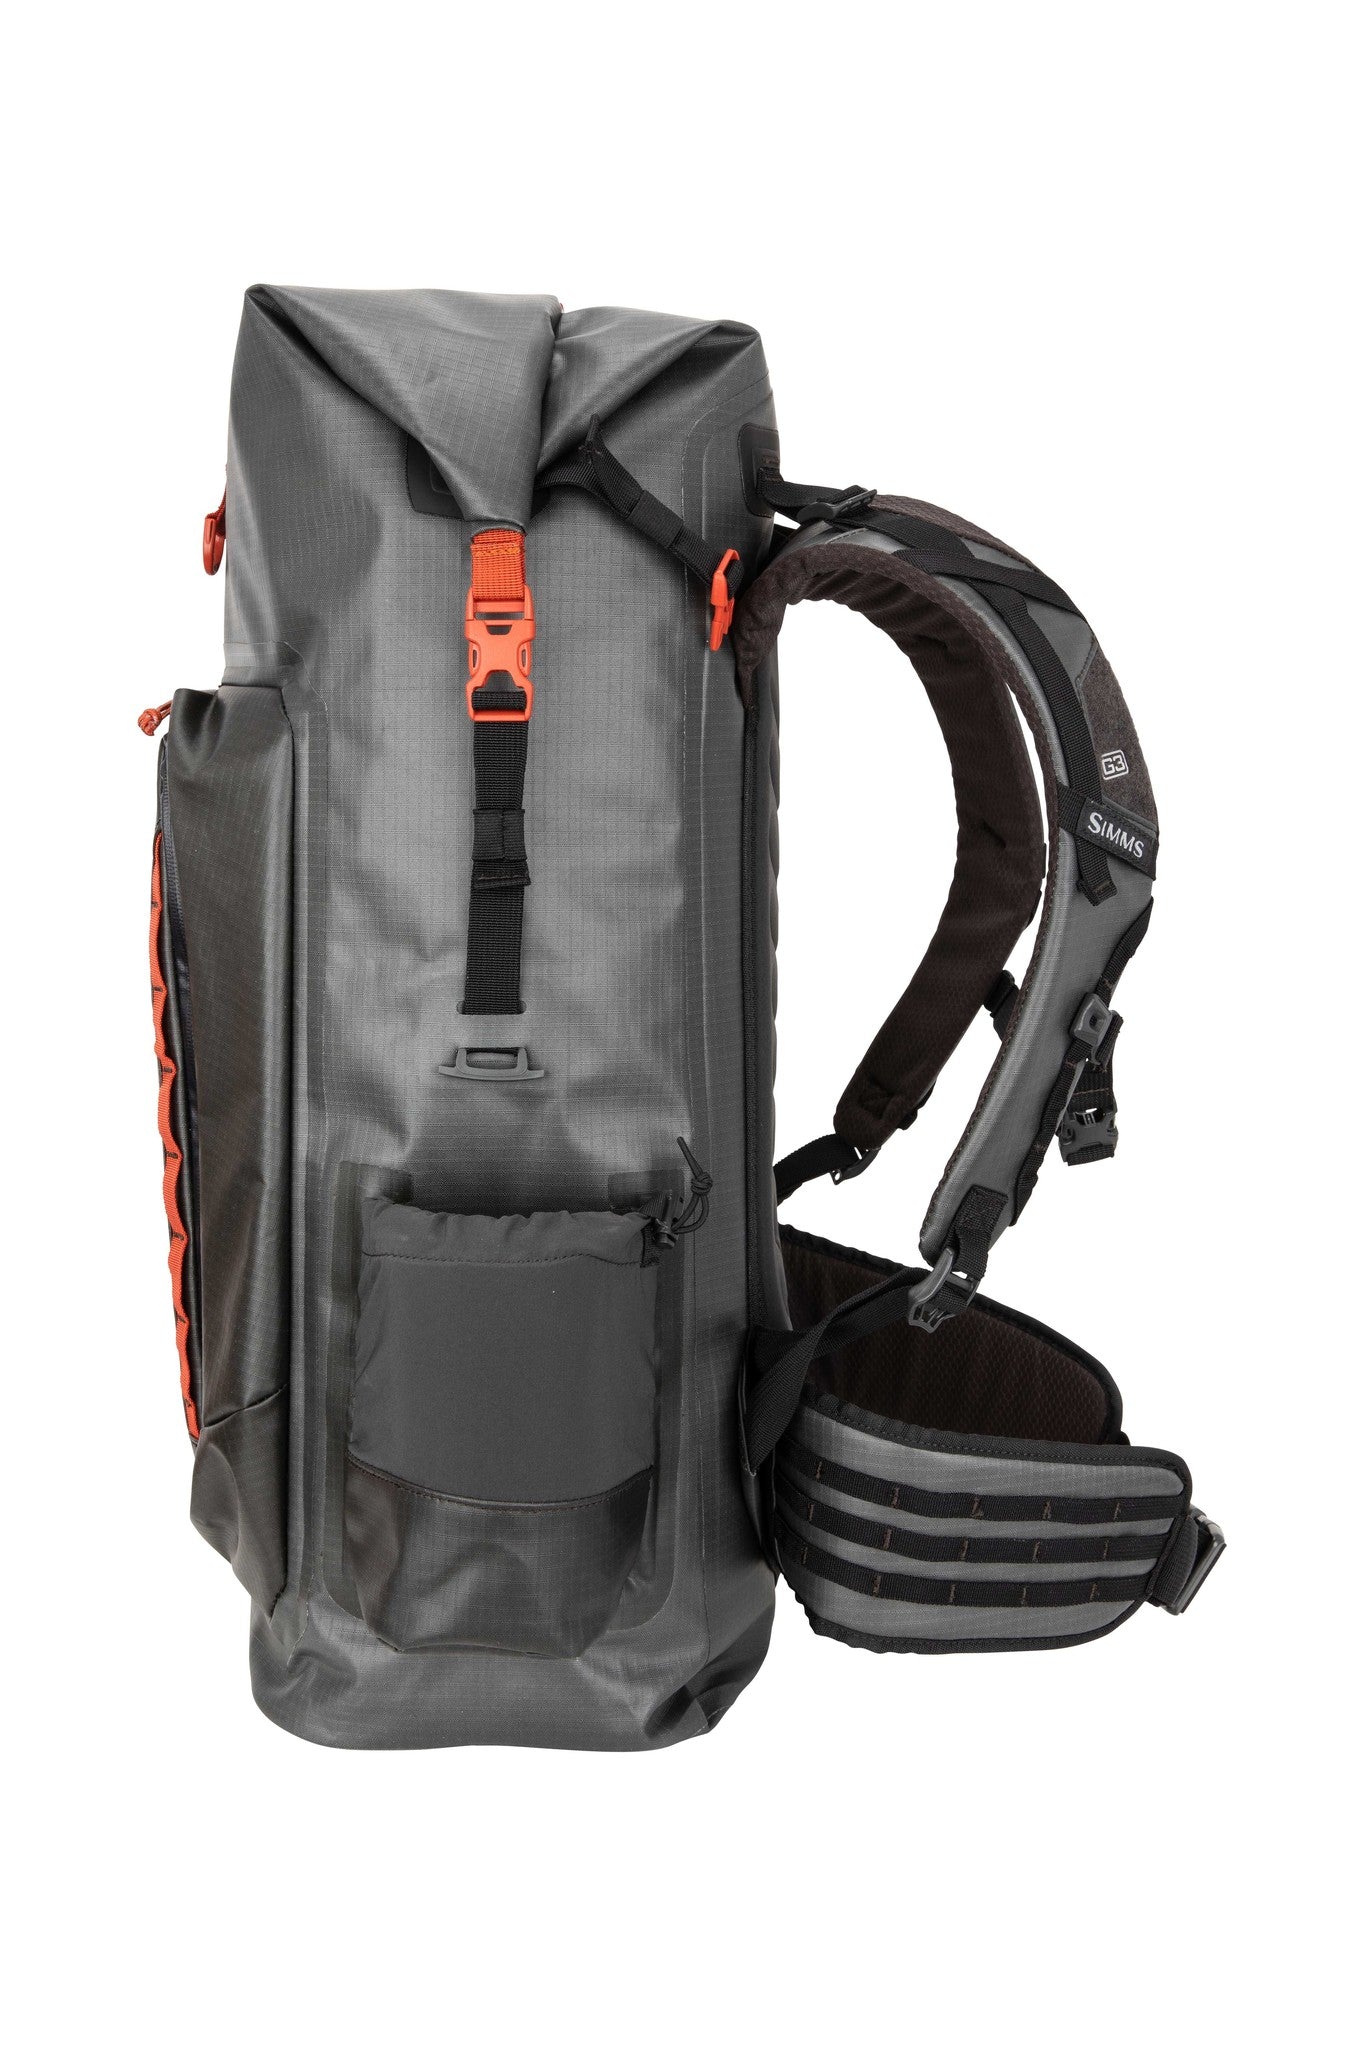 G3 Guide Backpack - New For 2022!